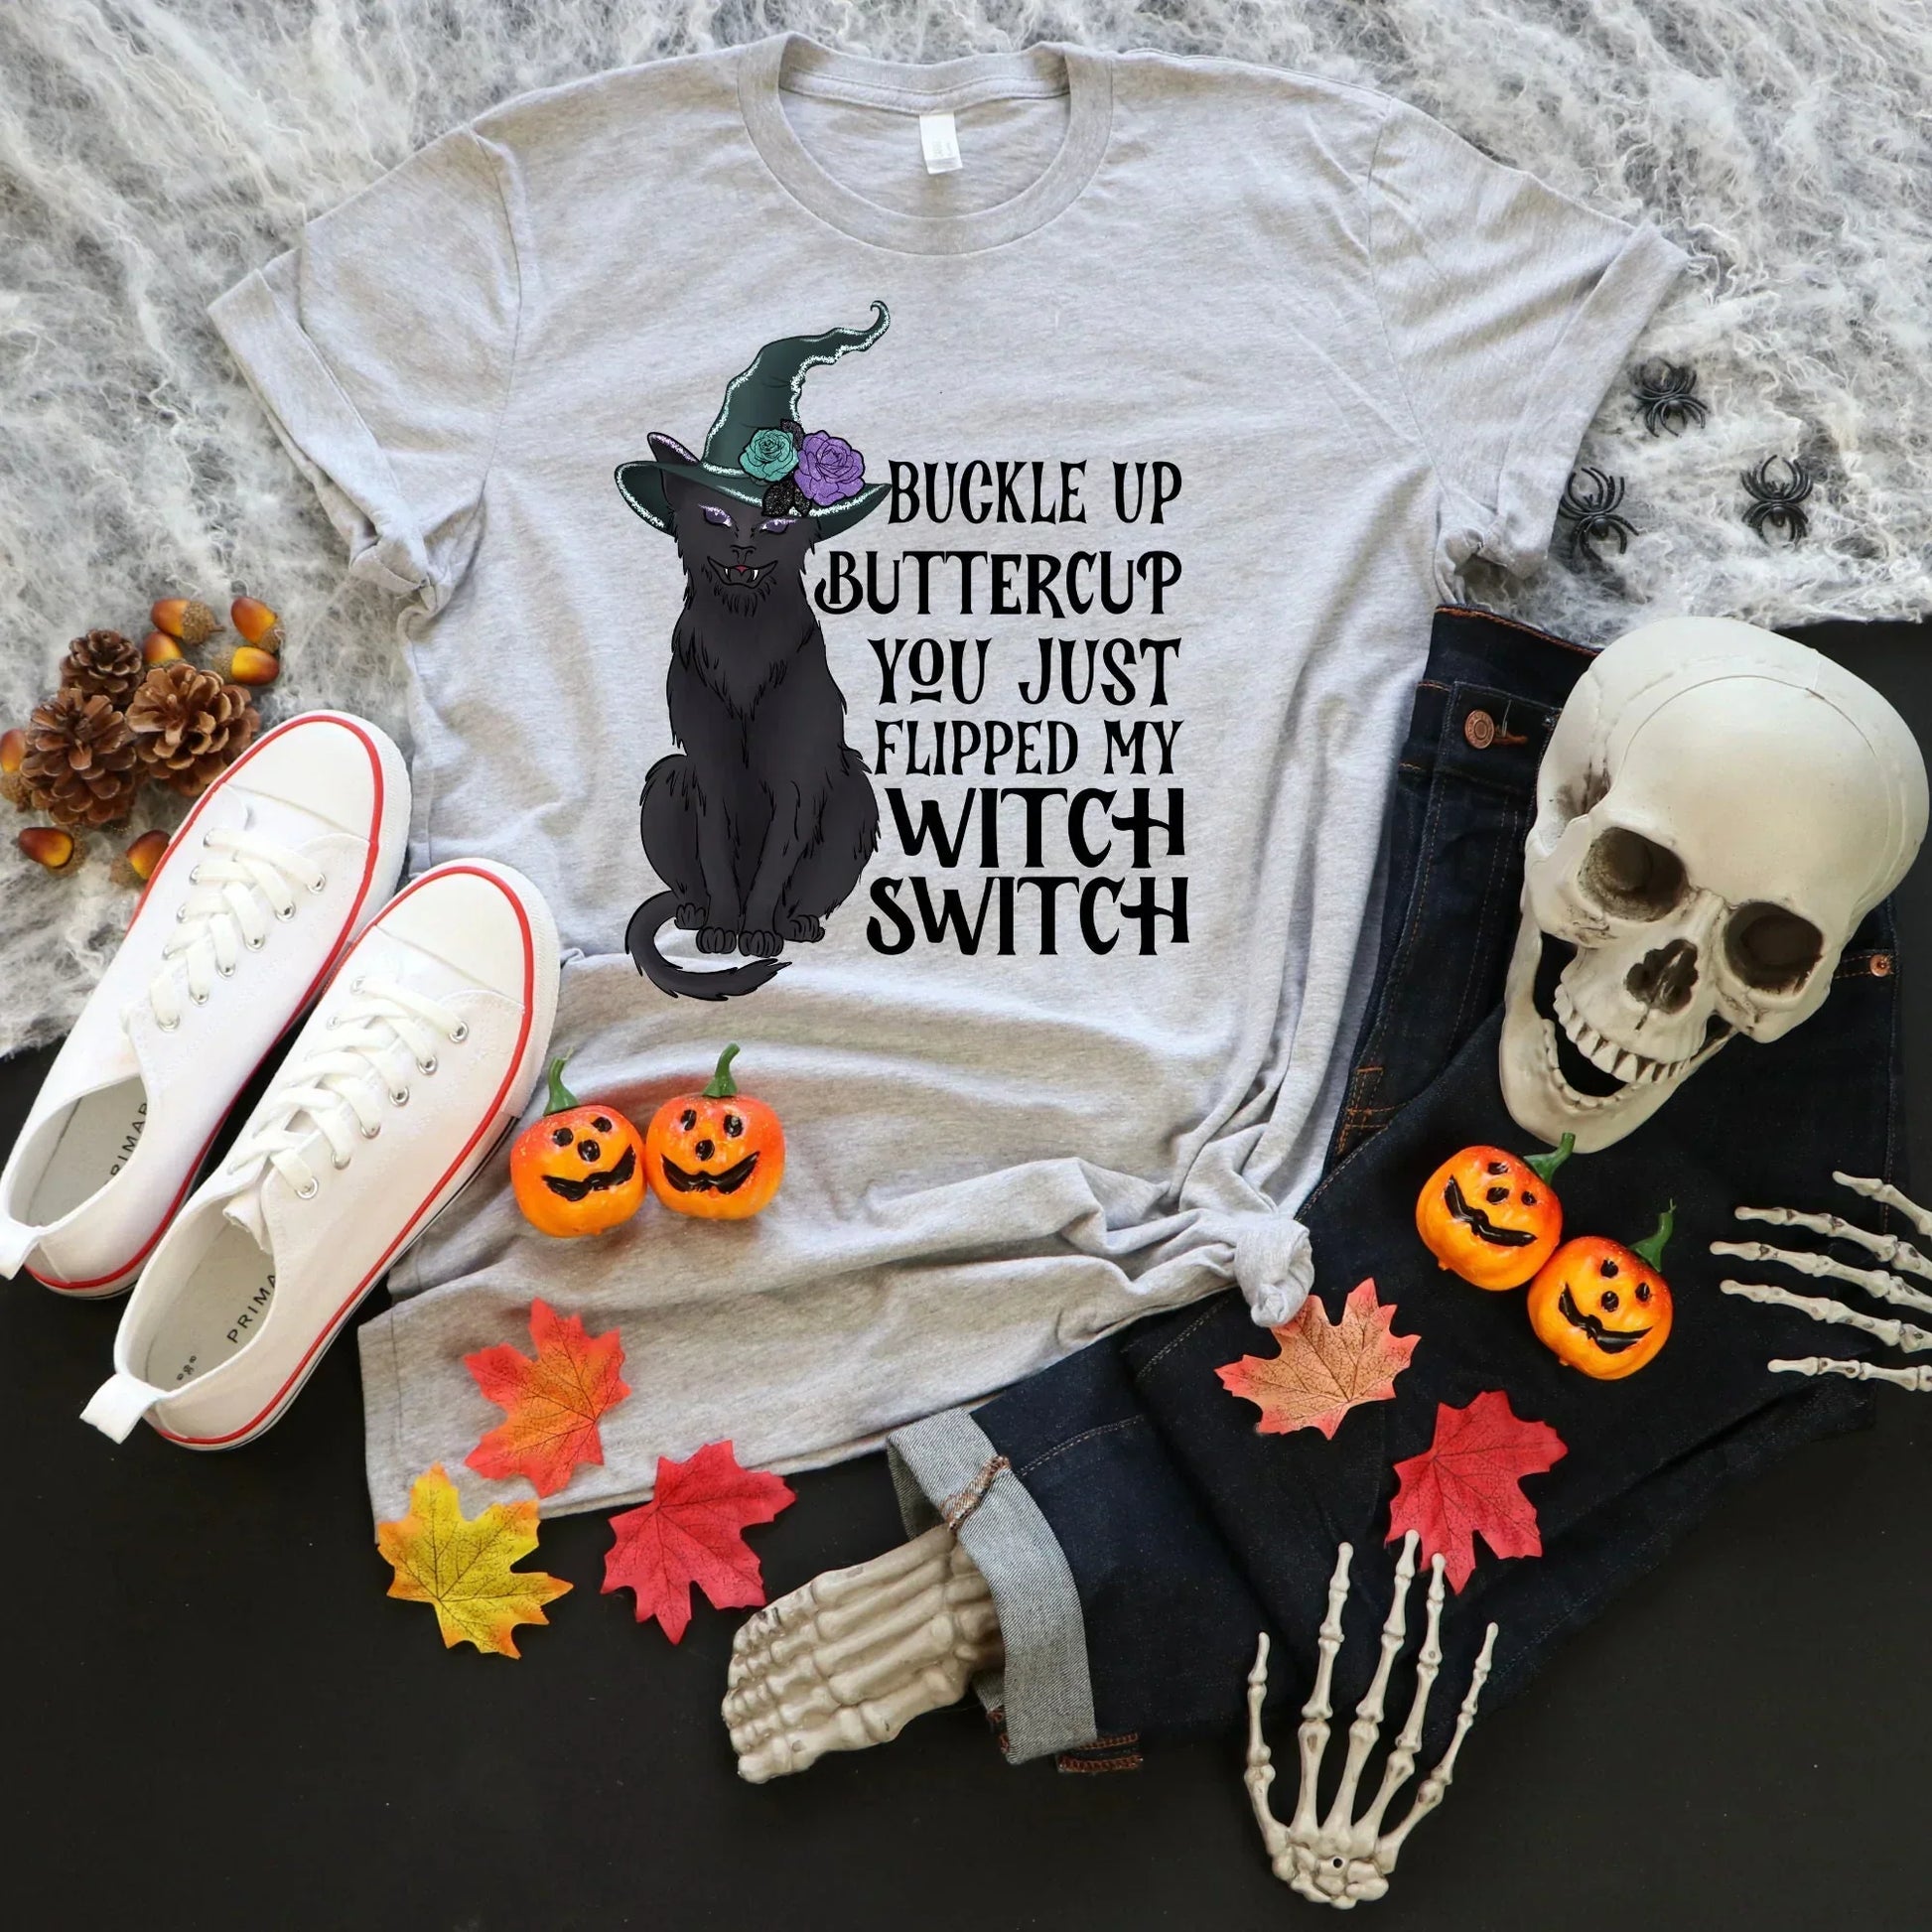 Funny Halloween Shirt, Black Cat Shirt, Gothic Shirt, Witchy Vibes, Pastel Halloween Sweatshirt, Magical Witch Hat Cat Shirt, Goth Style